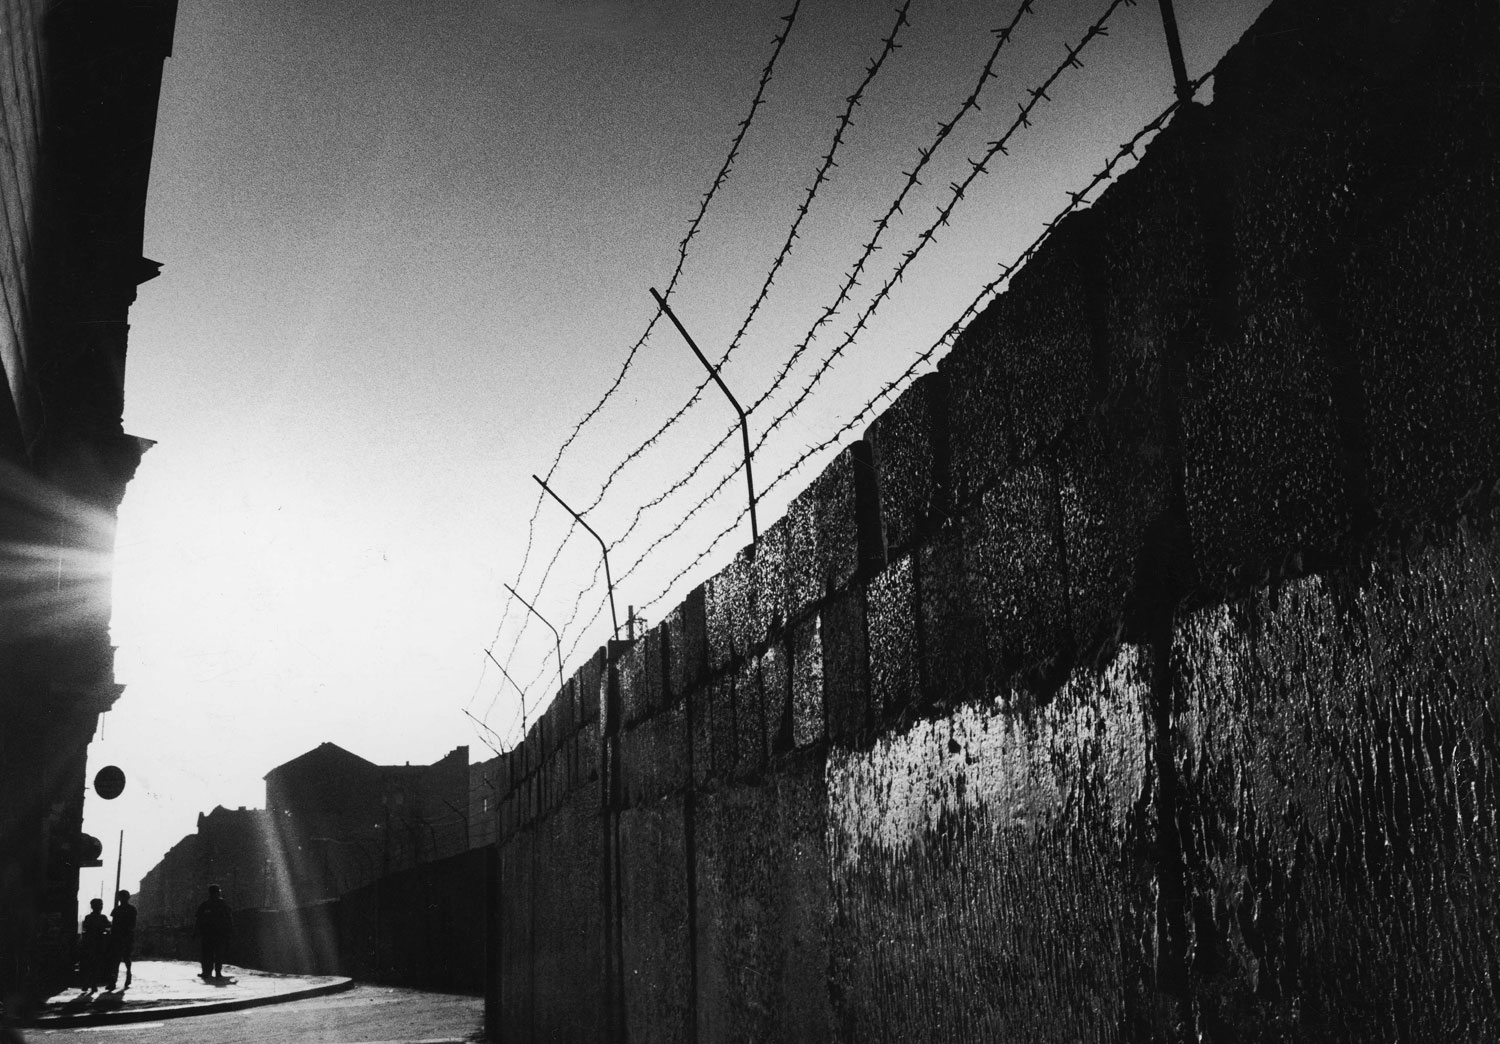 Sunlight shines on the barbed wire and blocks of the Berlin Wall